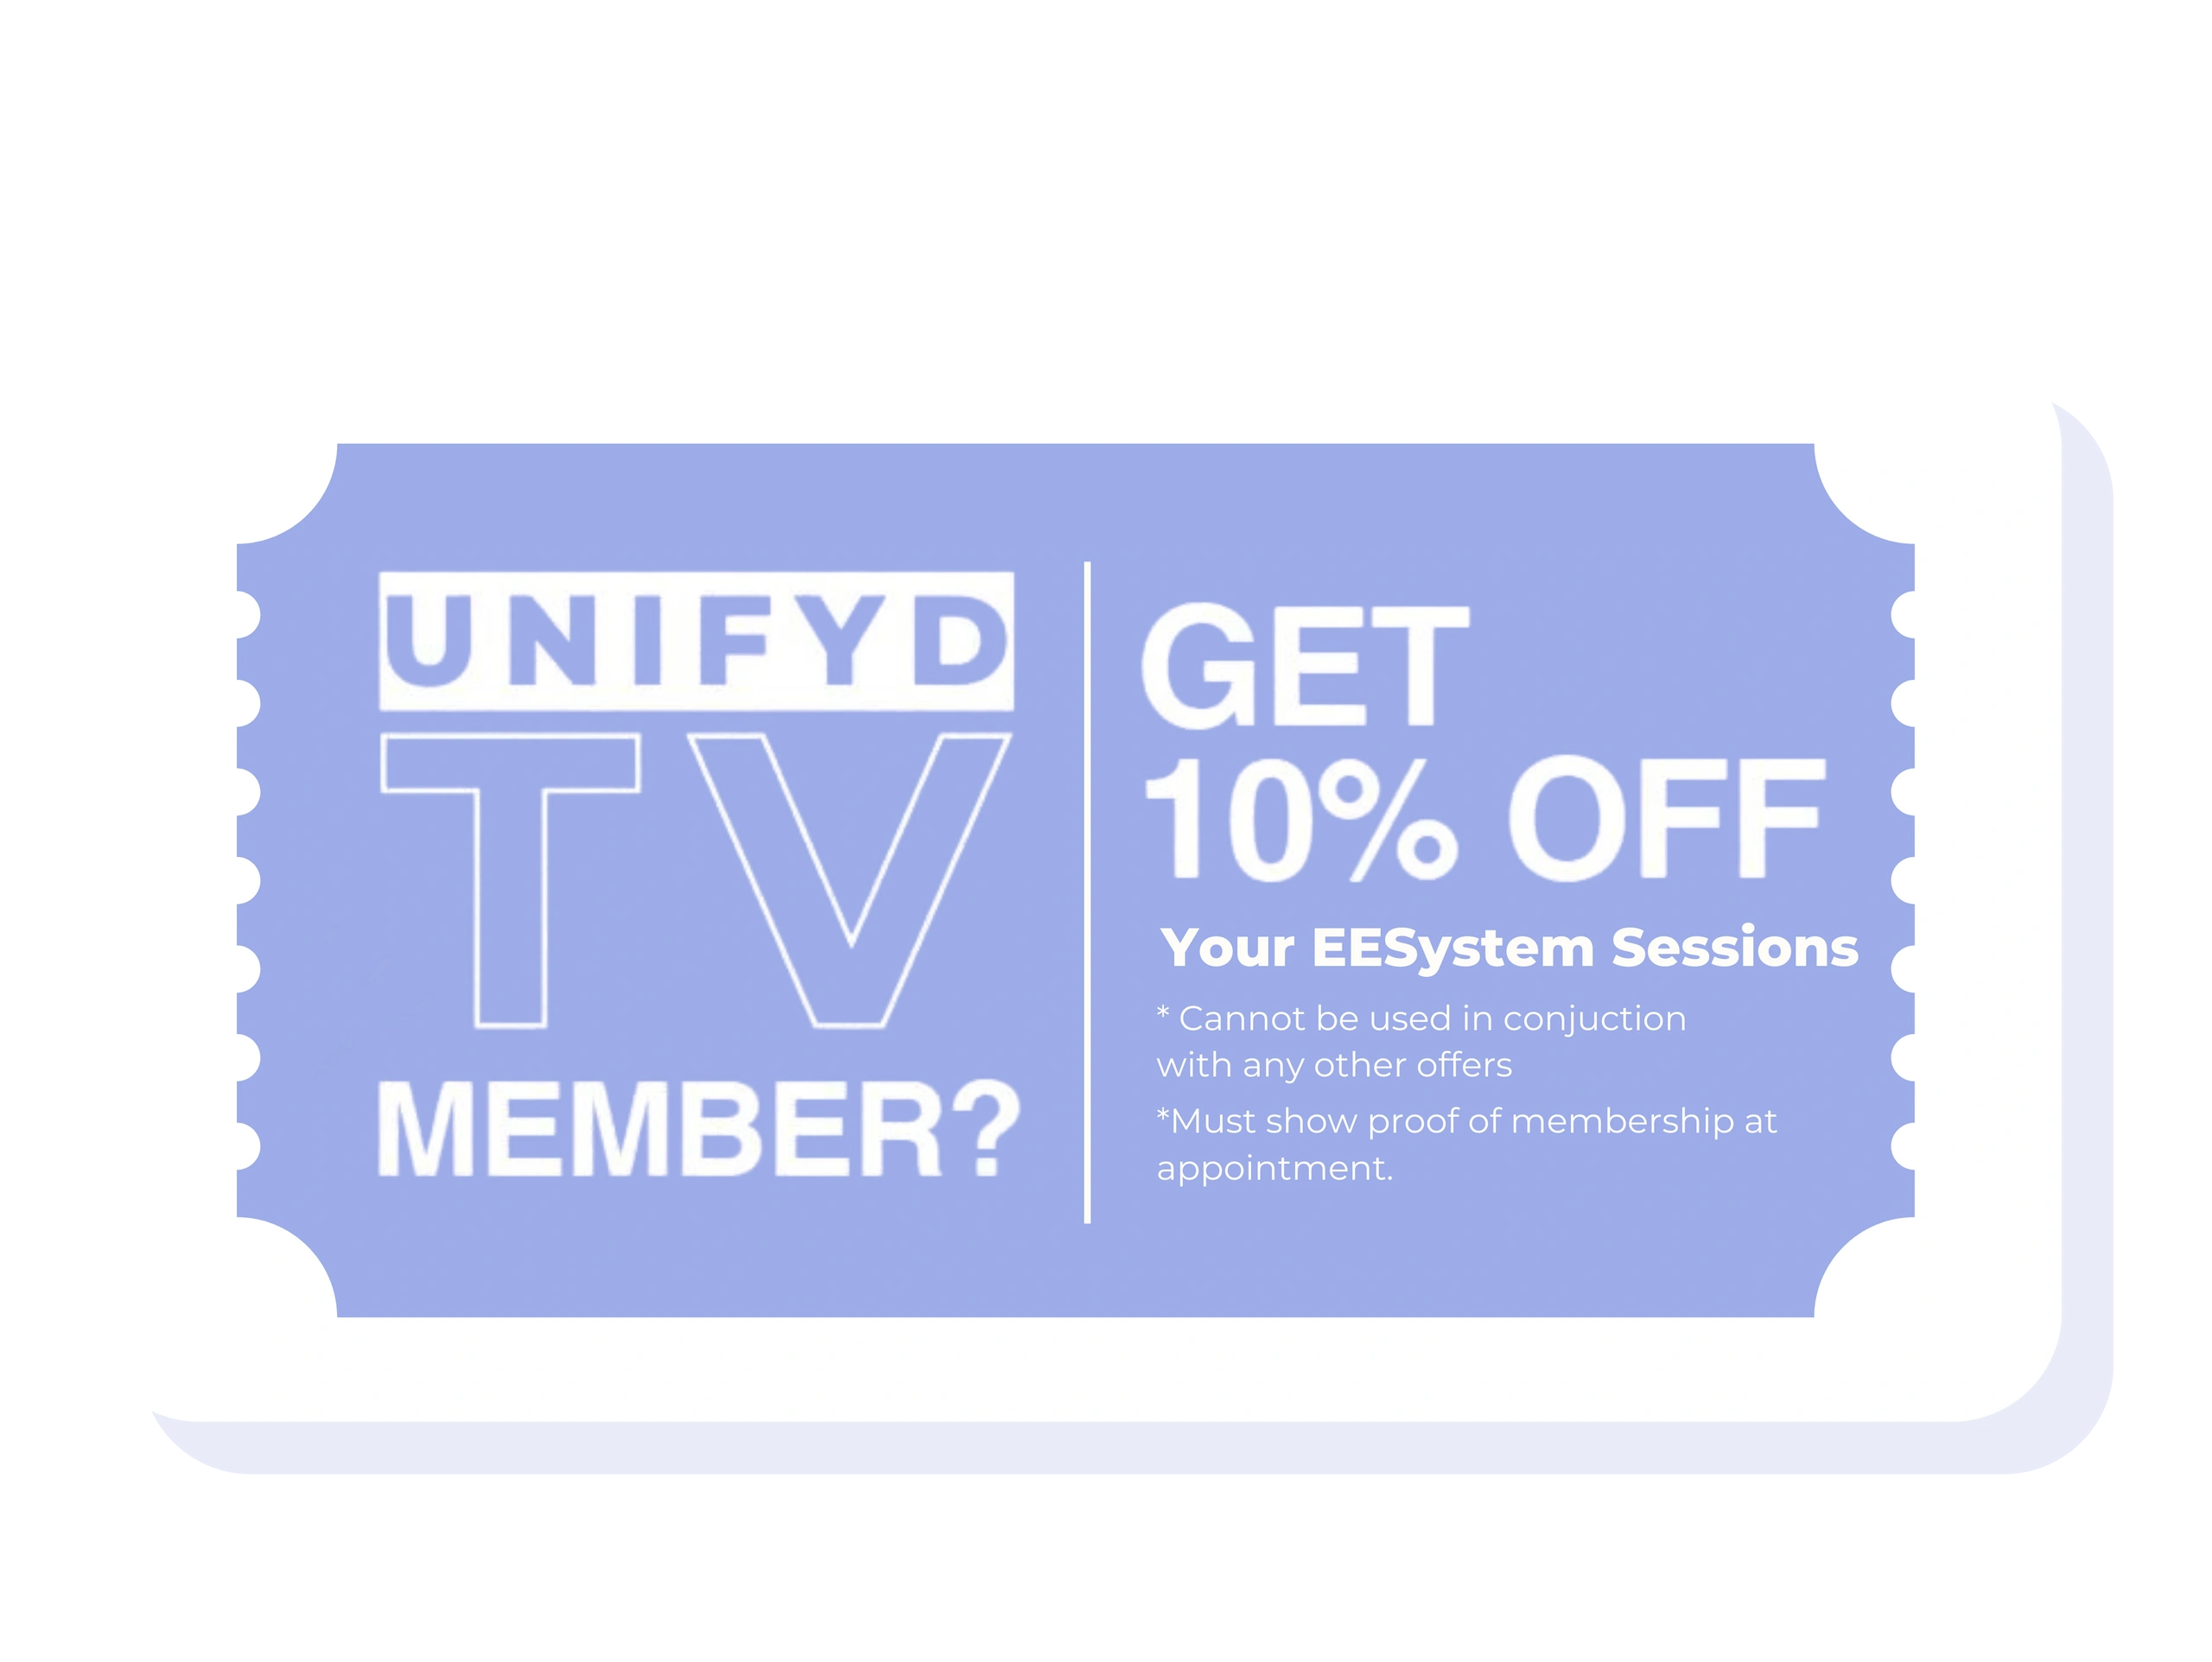 UNIFYD TV MEMBER DISCOUNT 10% OFF all ee system sessions